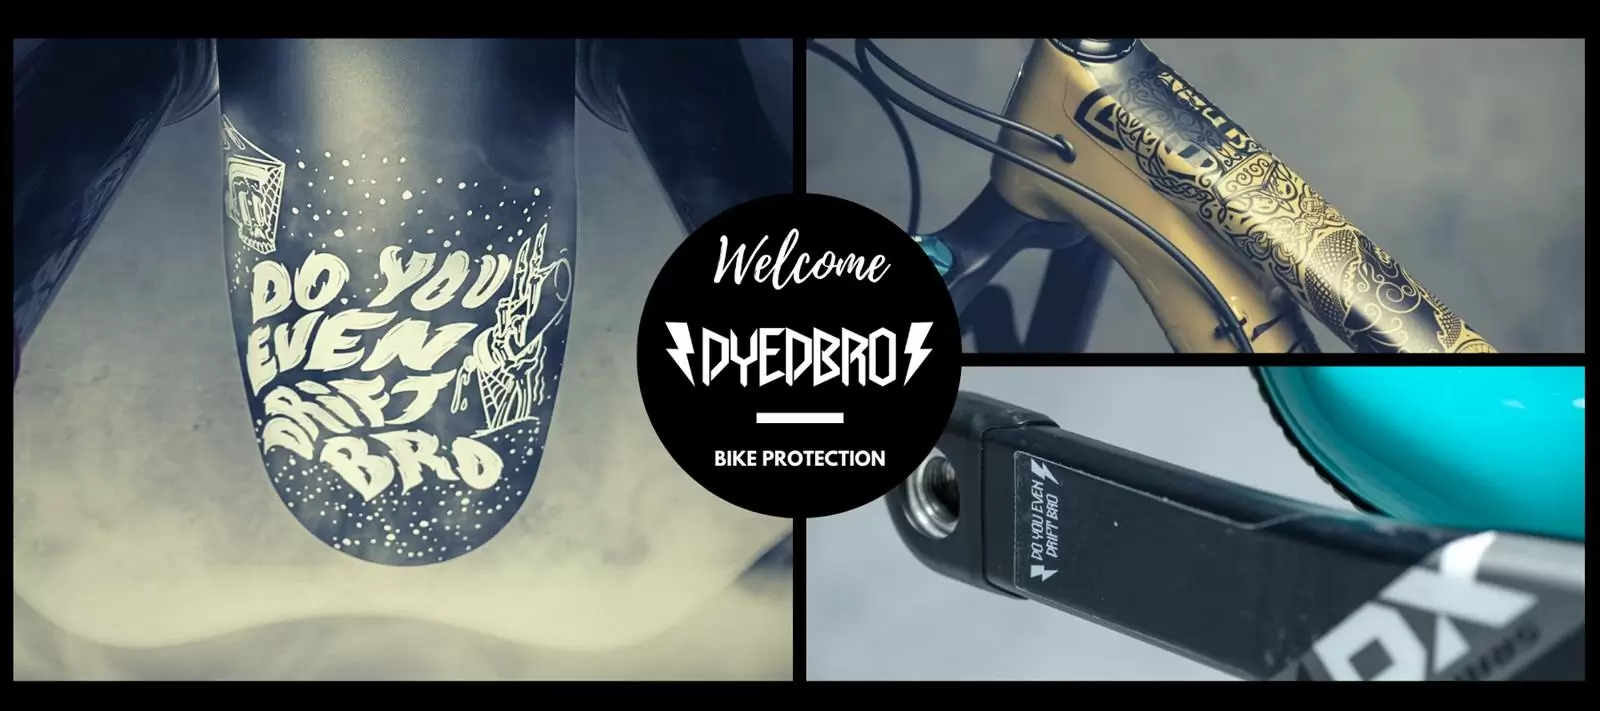 Welcome Dyedbro! The coolest way to protect your bìke - image